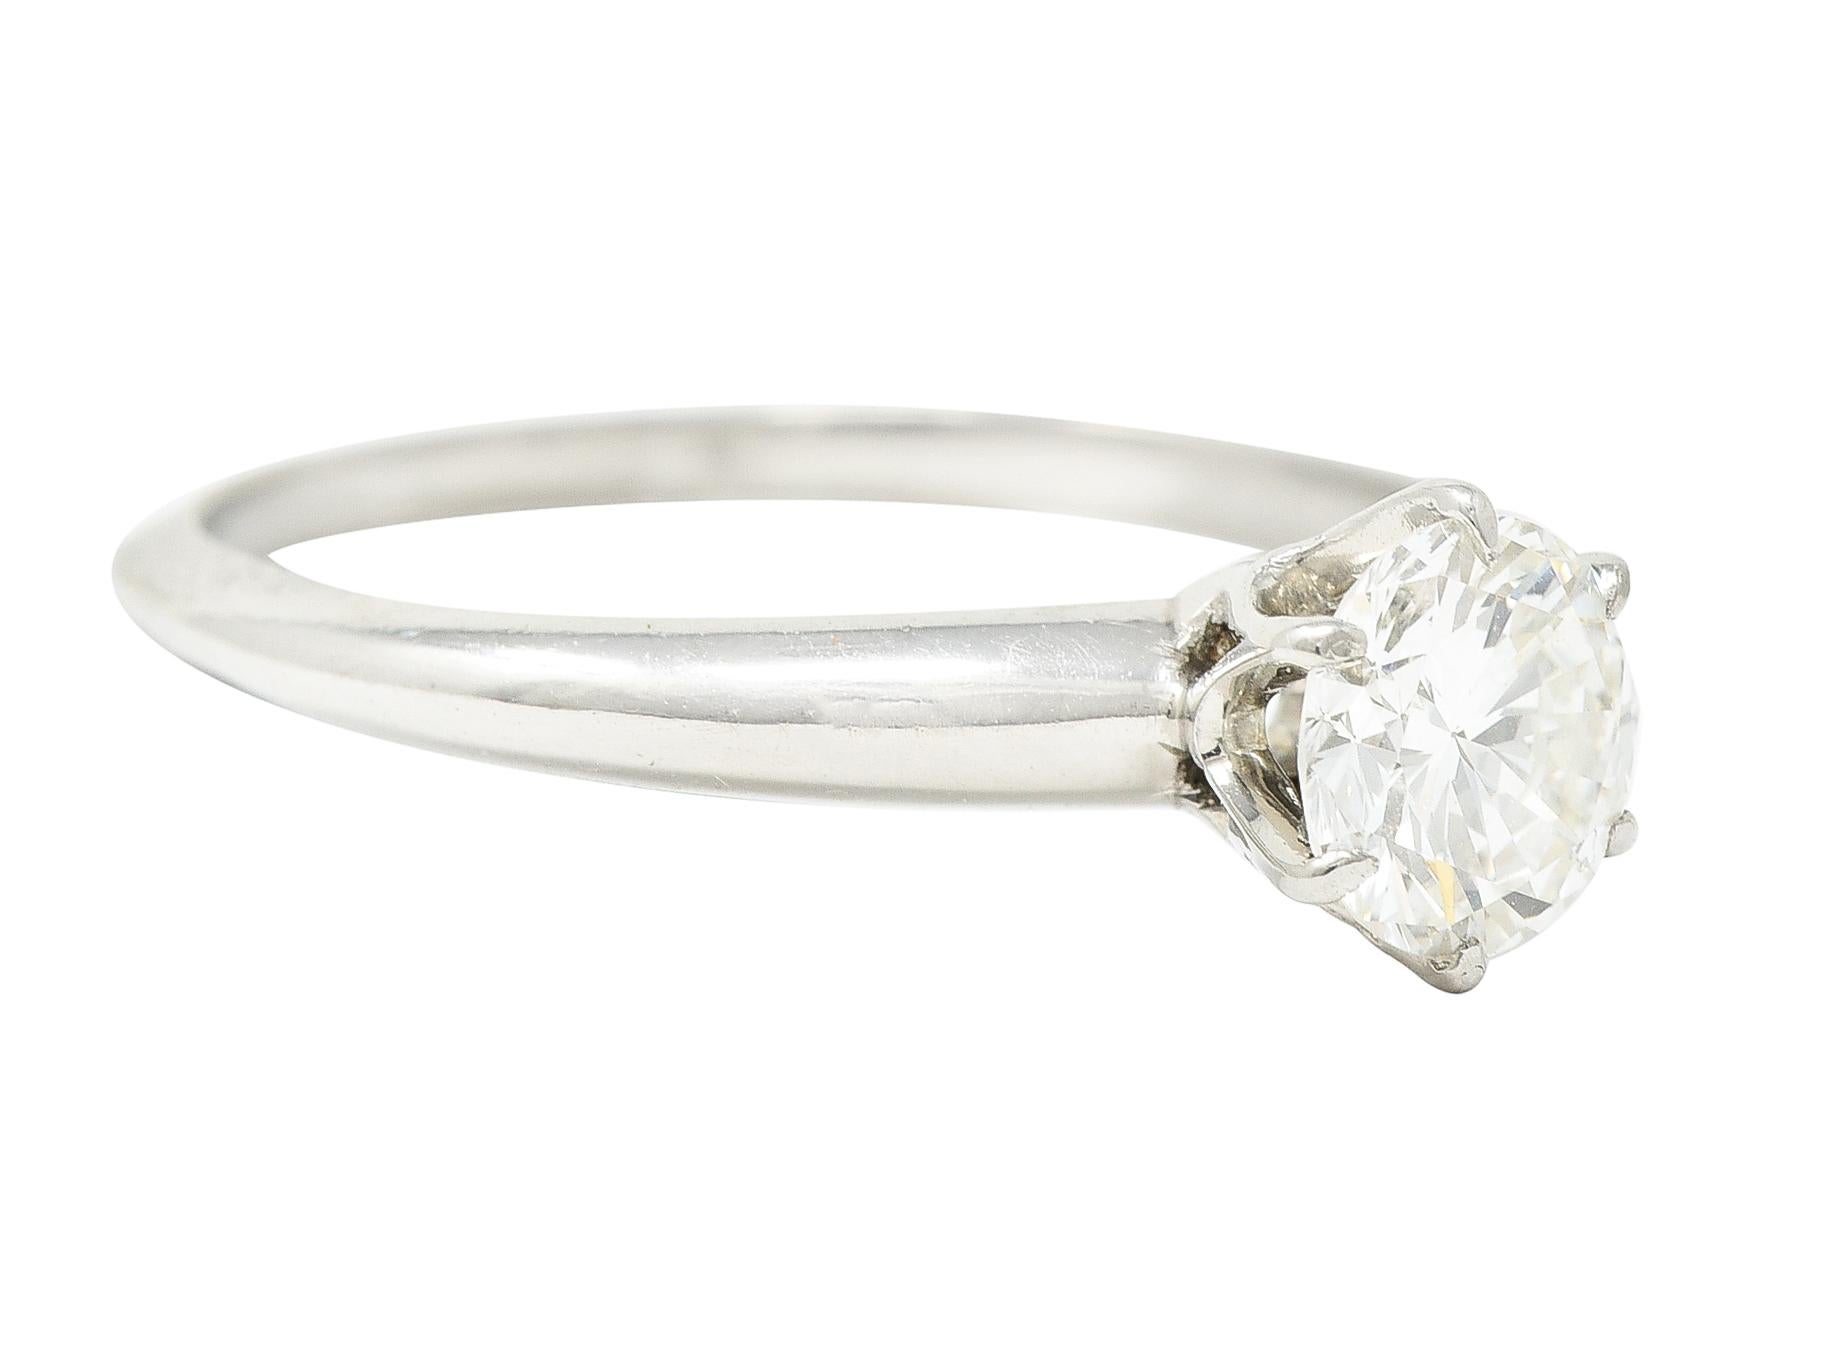 Centering a transitional cut diamond weighing approximately 0.60 carat total - H color with SI1 clarity. Prong set in a classic 6 prong Tiffany style setting. With knife edge shank. Stamped for platinum. Circa: 1950's. Ring size: 5 and sizable.